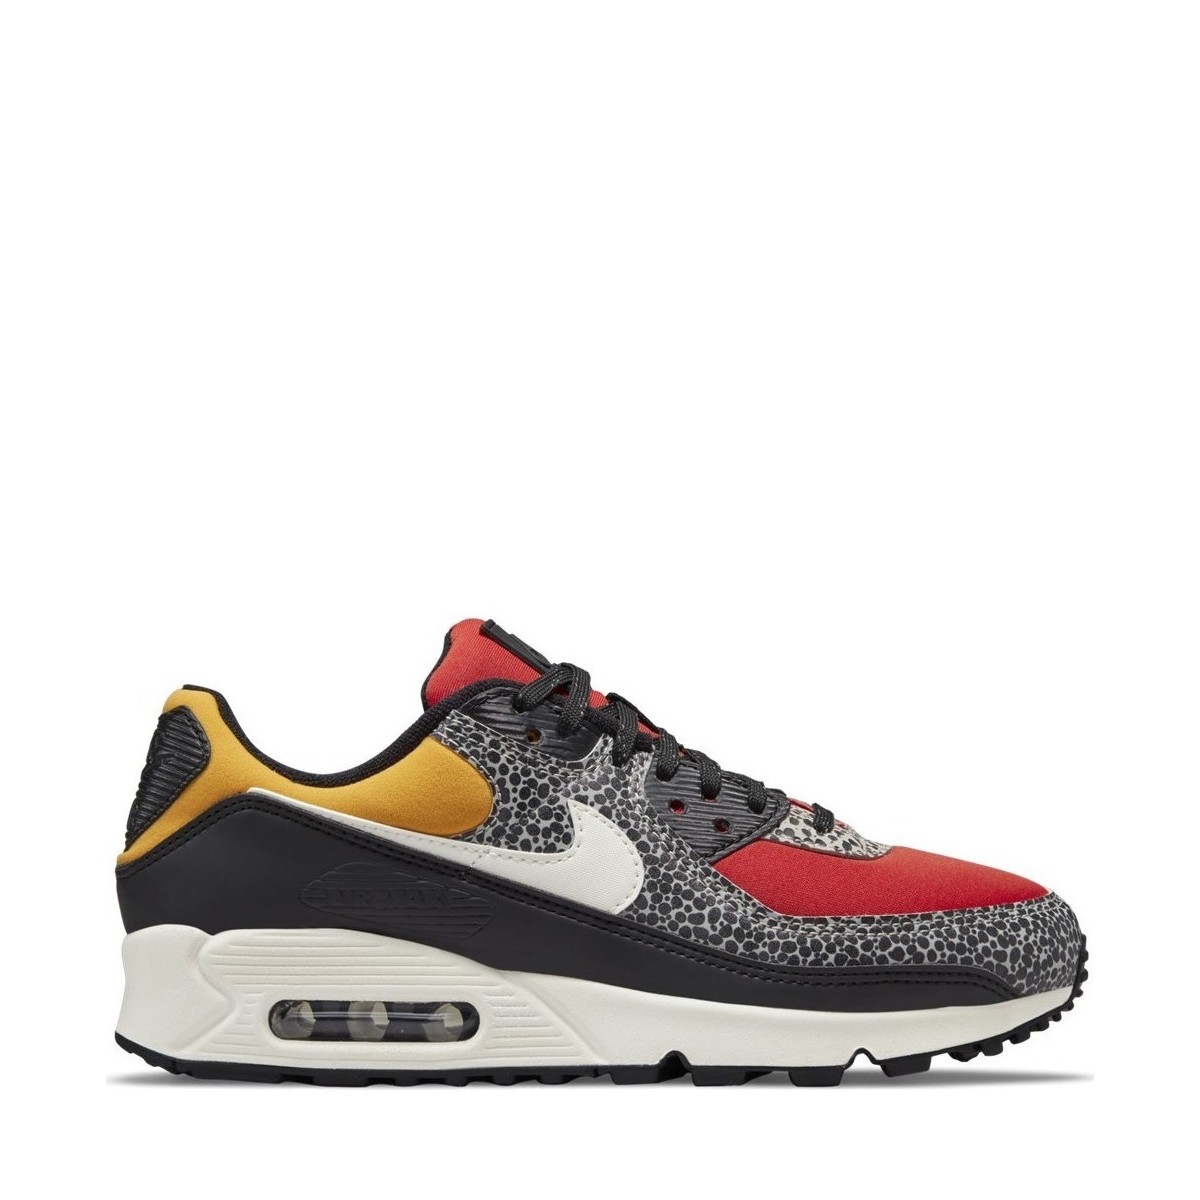 Shoes Women Low top trainers Nike Air Max 90 SE Grey, Black